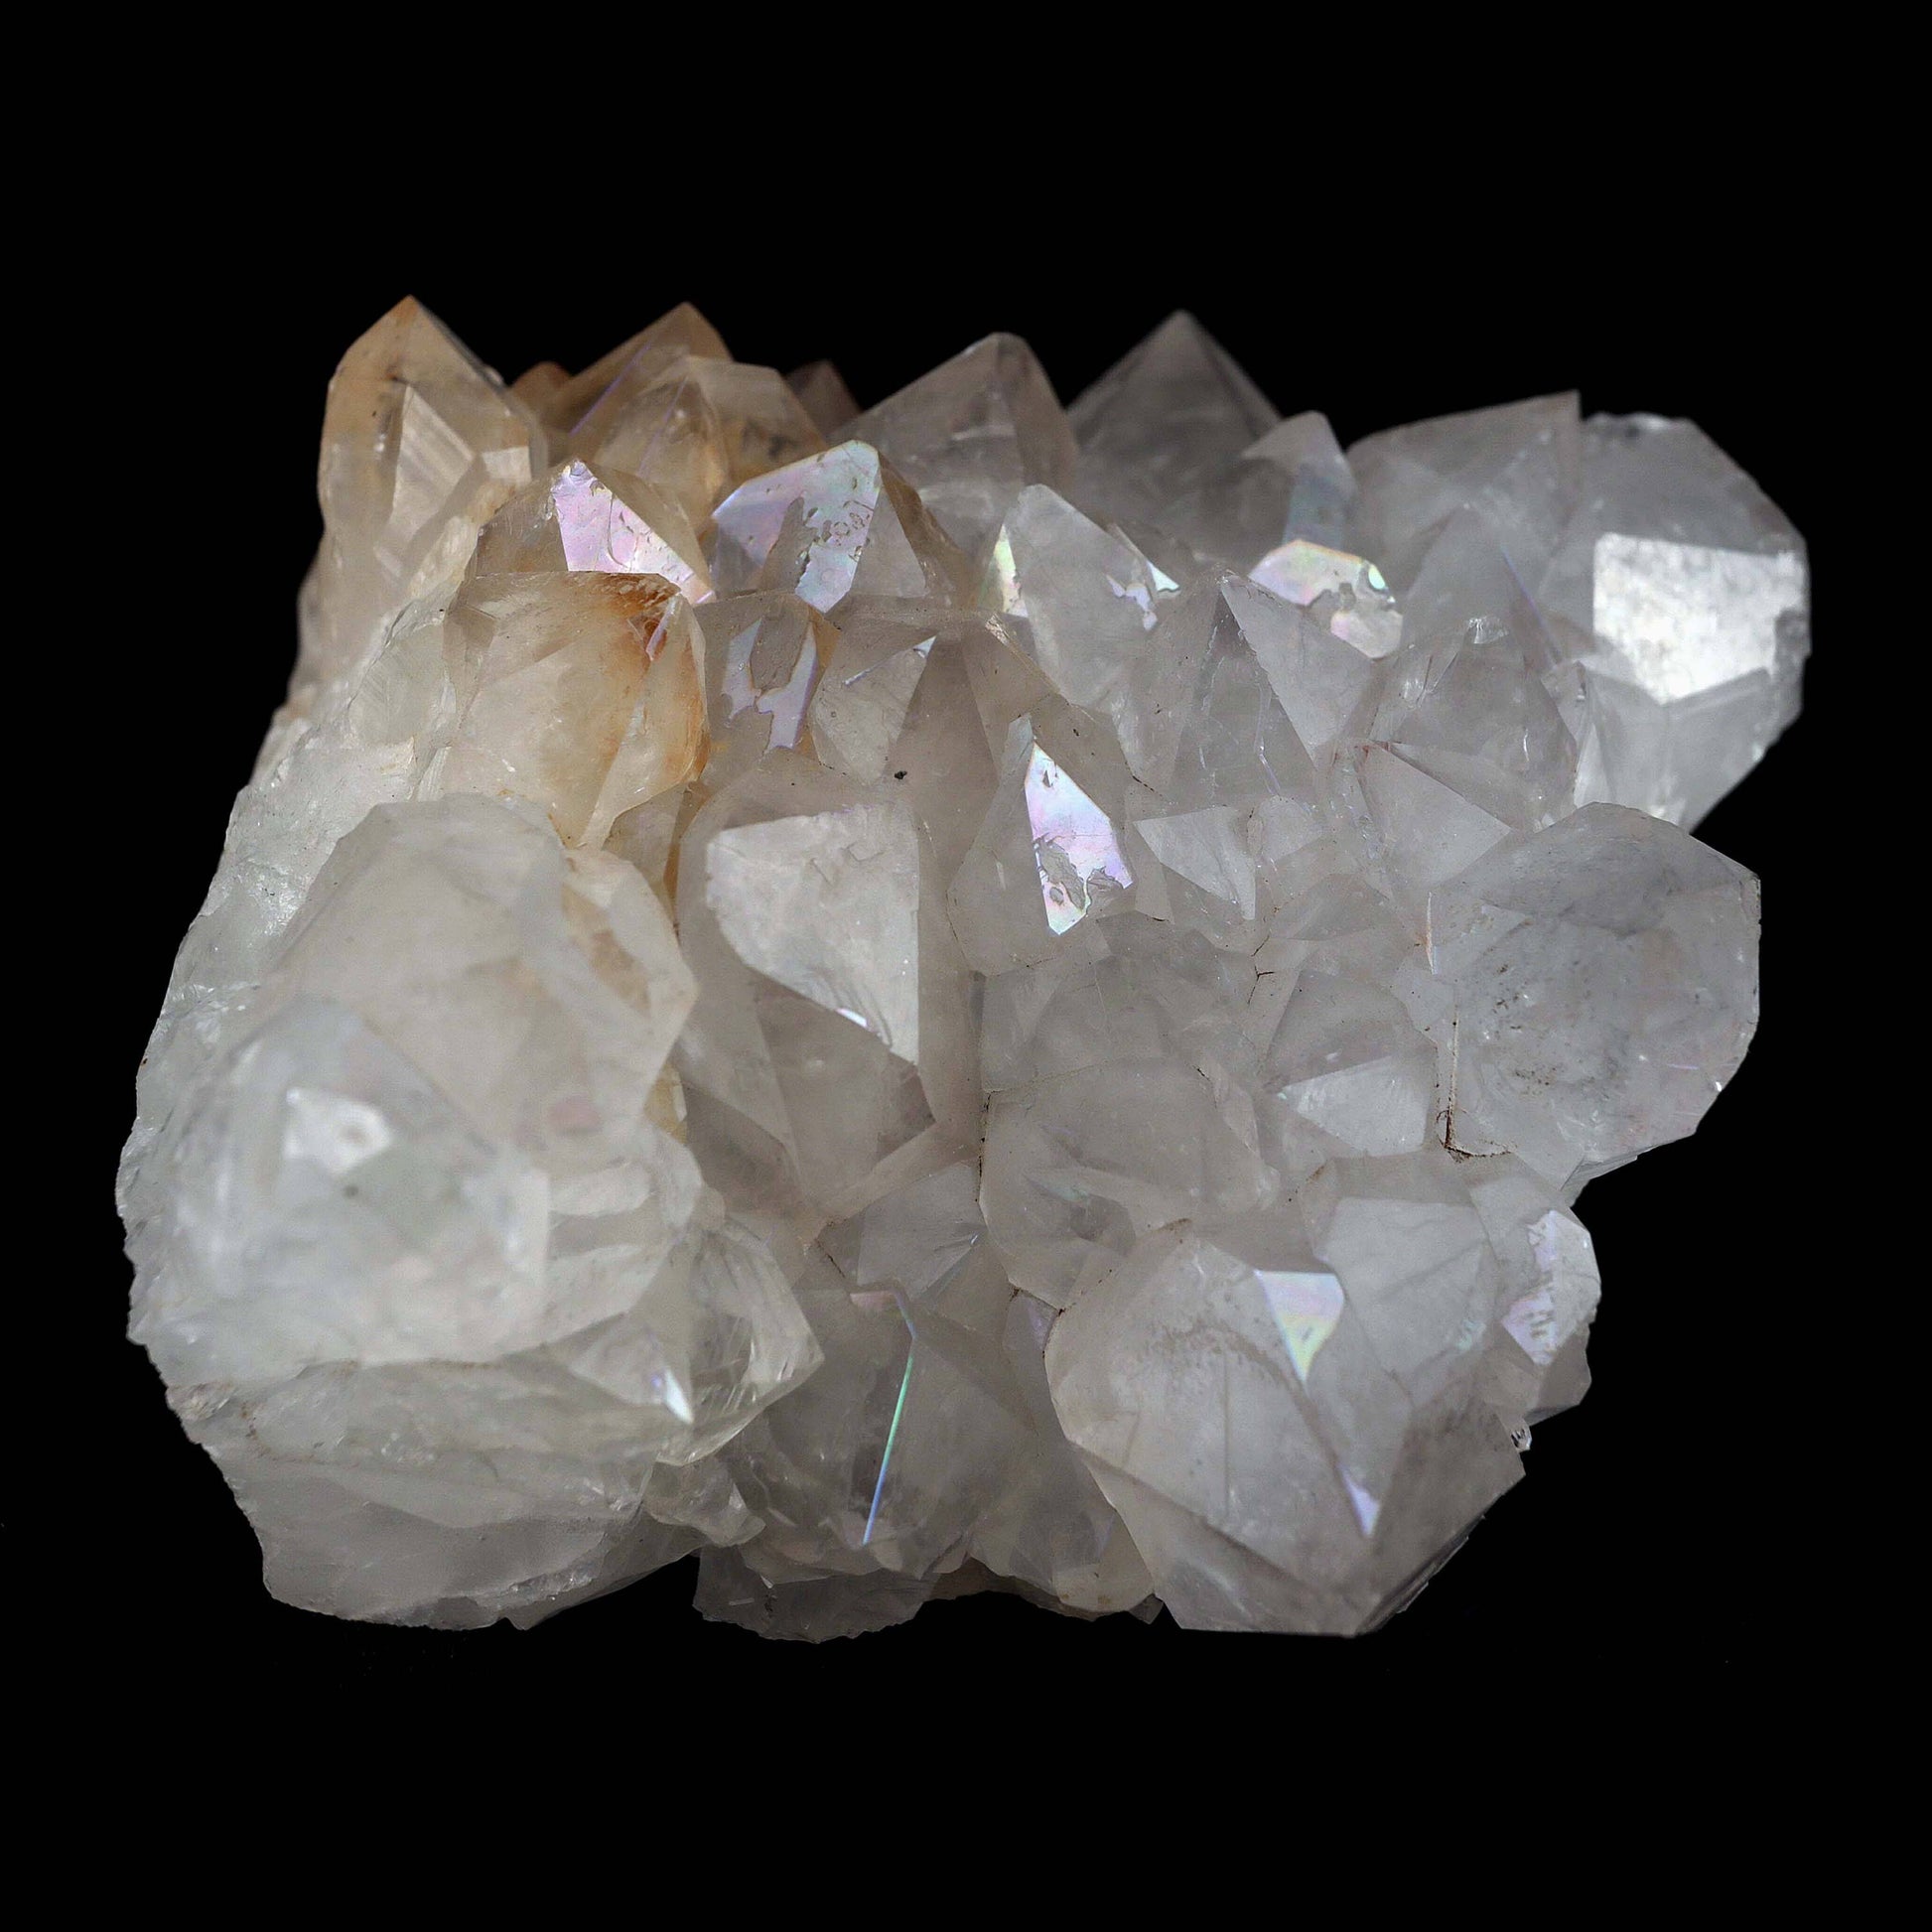 MM Quartz with Rainbow Effect 'Anandalite' Natural Mineral Specimen #…  https://www.superbminerals.us/products/mm-quartz-with-rainbow-effect-anandalite-natural-mineral-specimen-b-4594  Features:Anandalite is mined in India and is also known as Aurora Quartz or Rainbow Quartz. The clusters' tiny tips reflect luminous rainbows that arise on the quartz's surface (as opposed to the internal rainbows that reflect from within in other mineral specimens.) Surface rainbow reflections